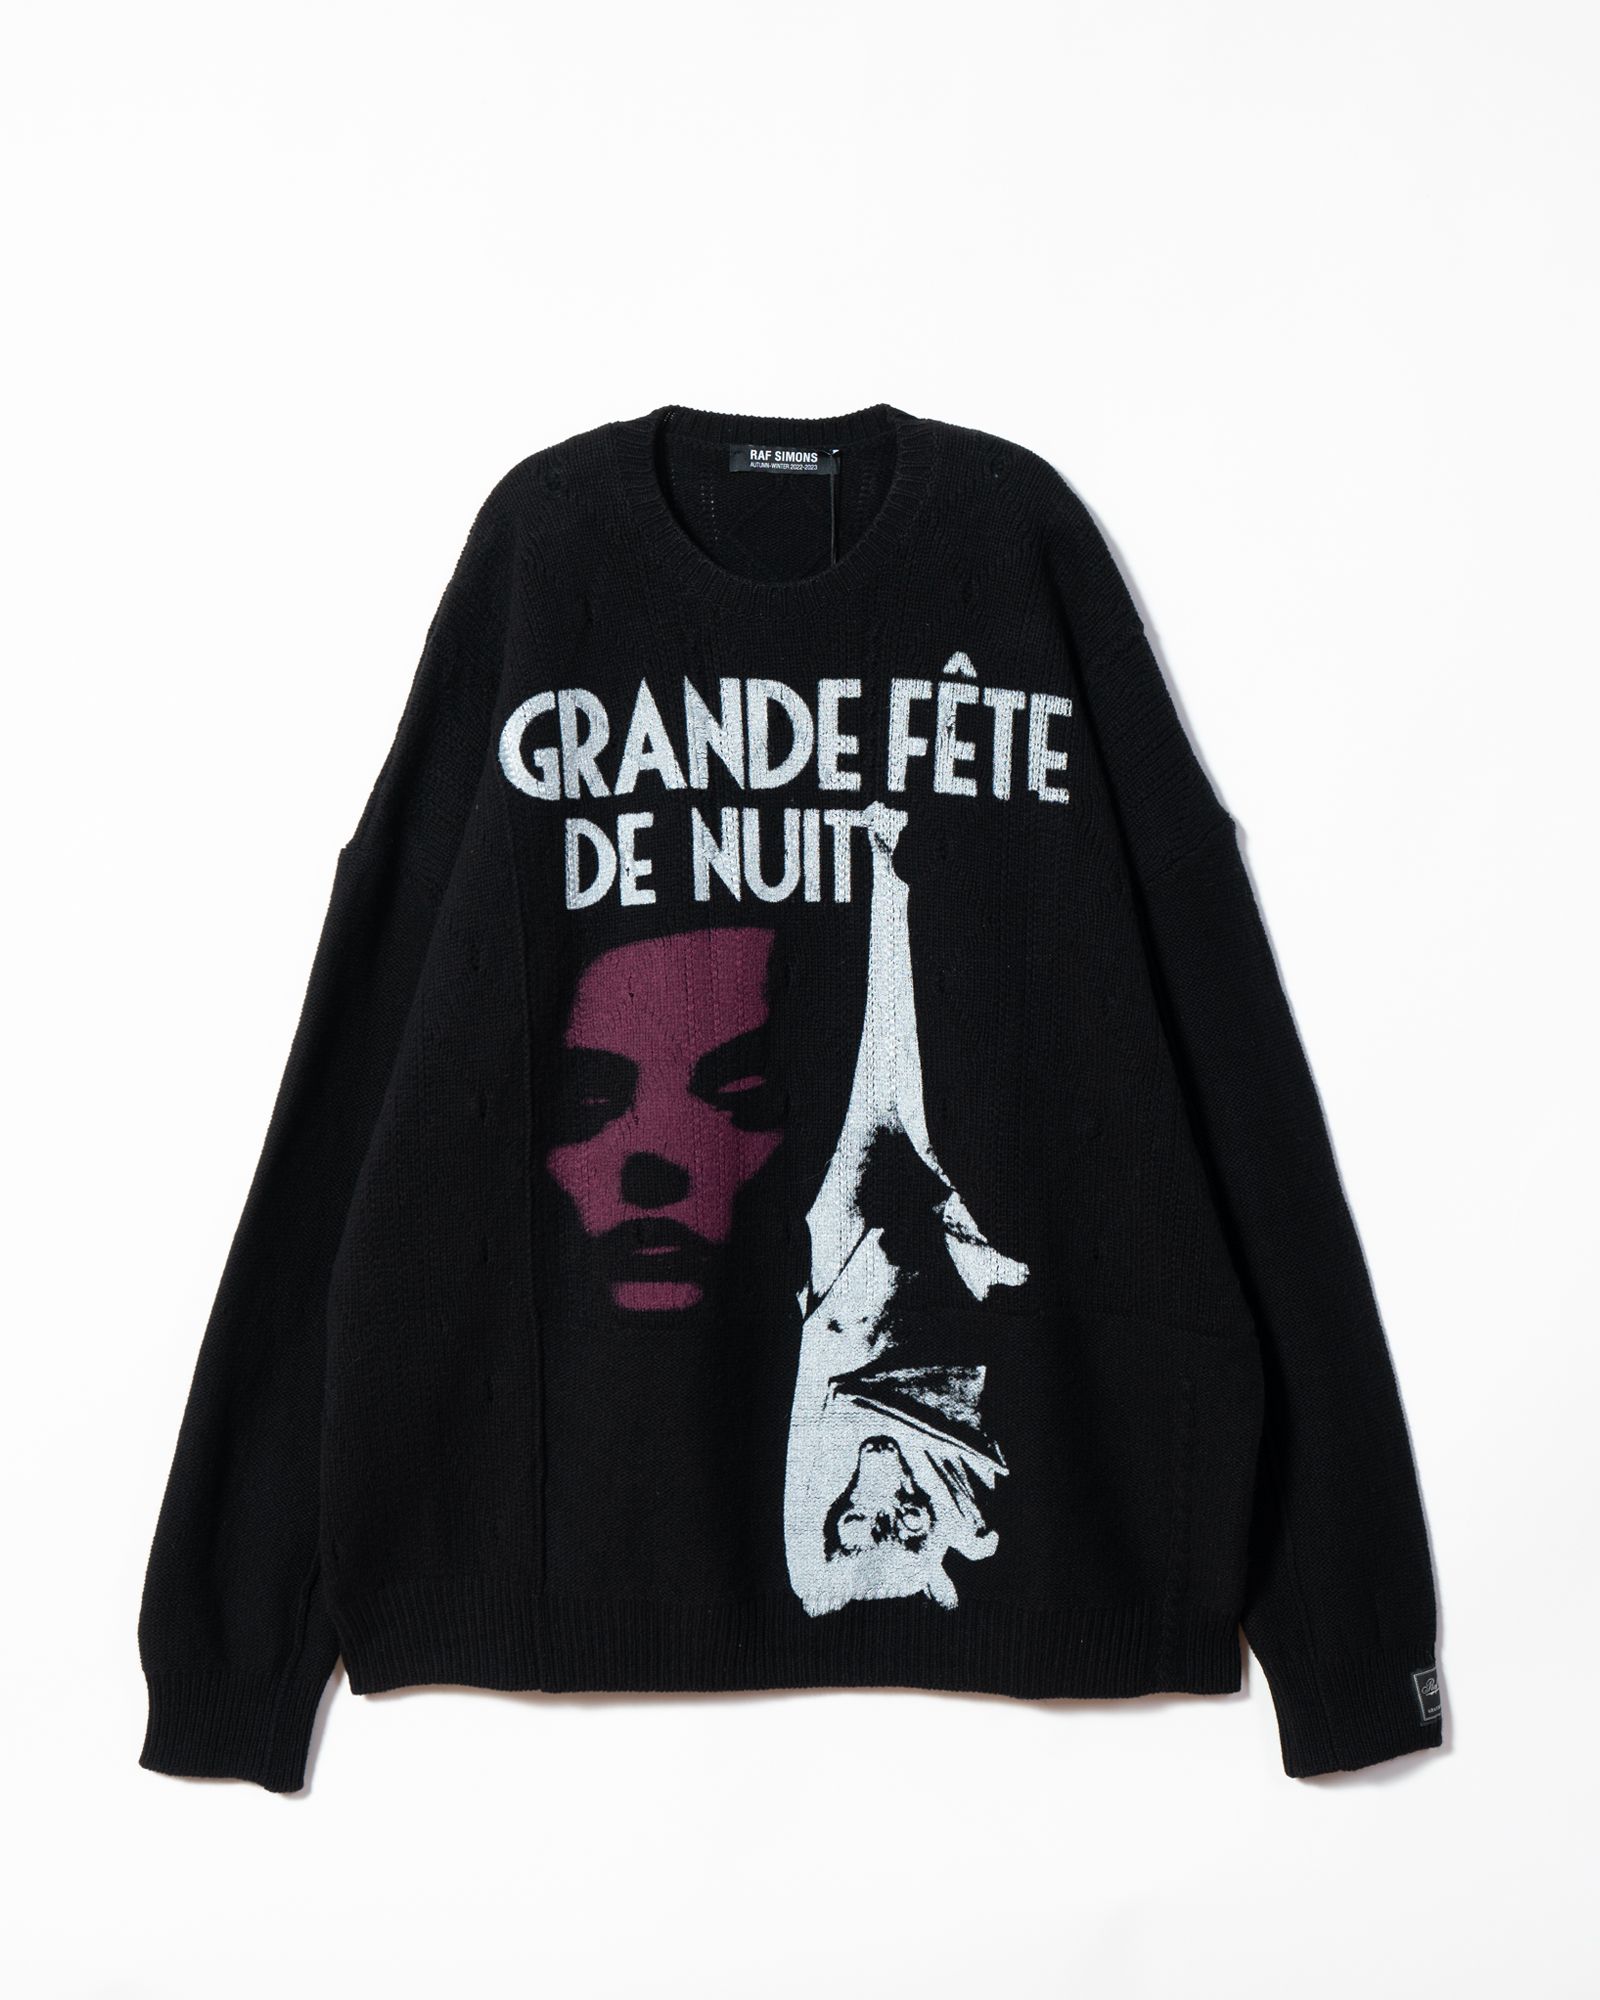 RAF SIMONS - Loose fit braid relief roundneck sweater printed